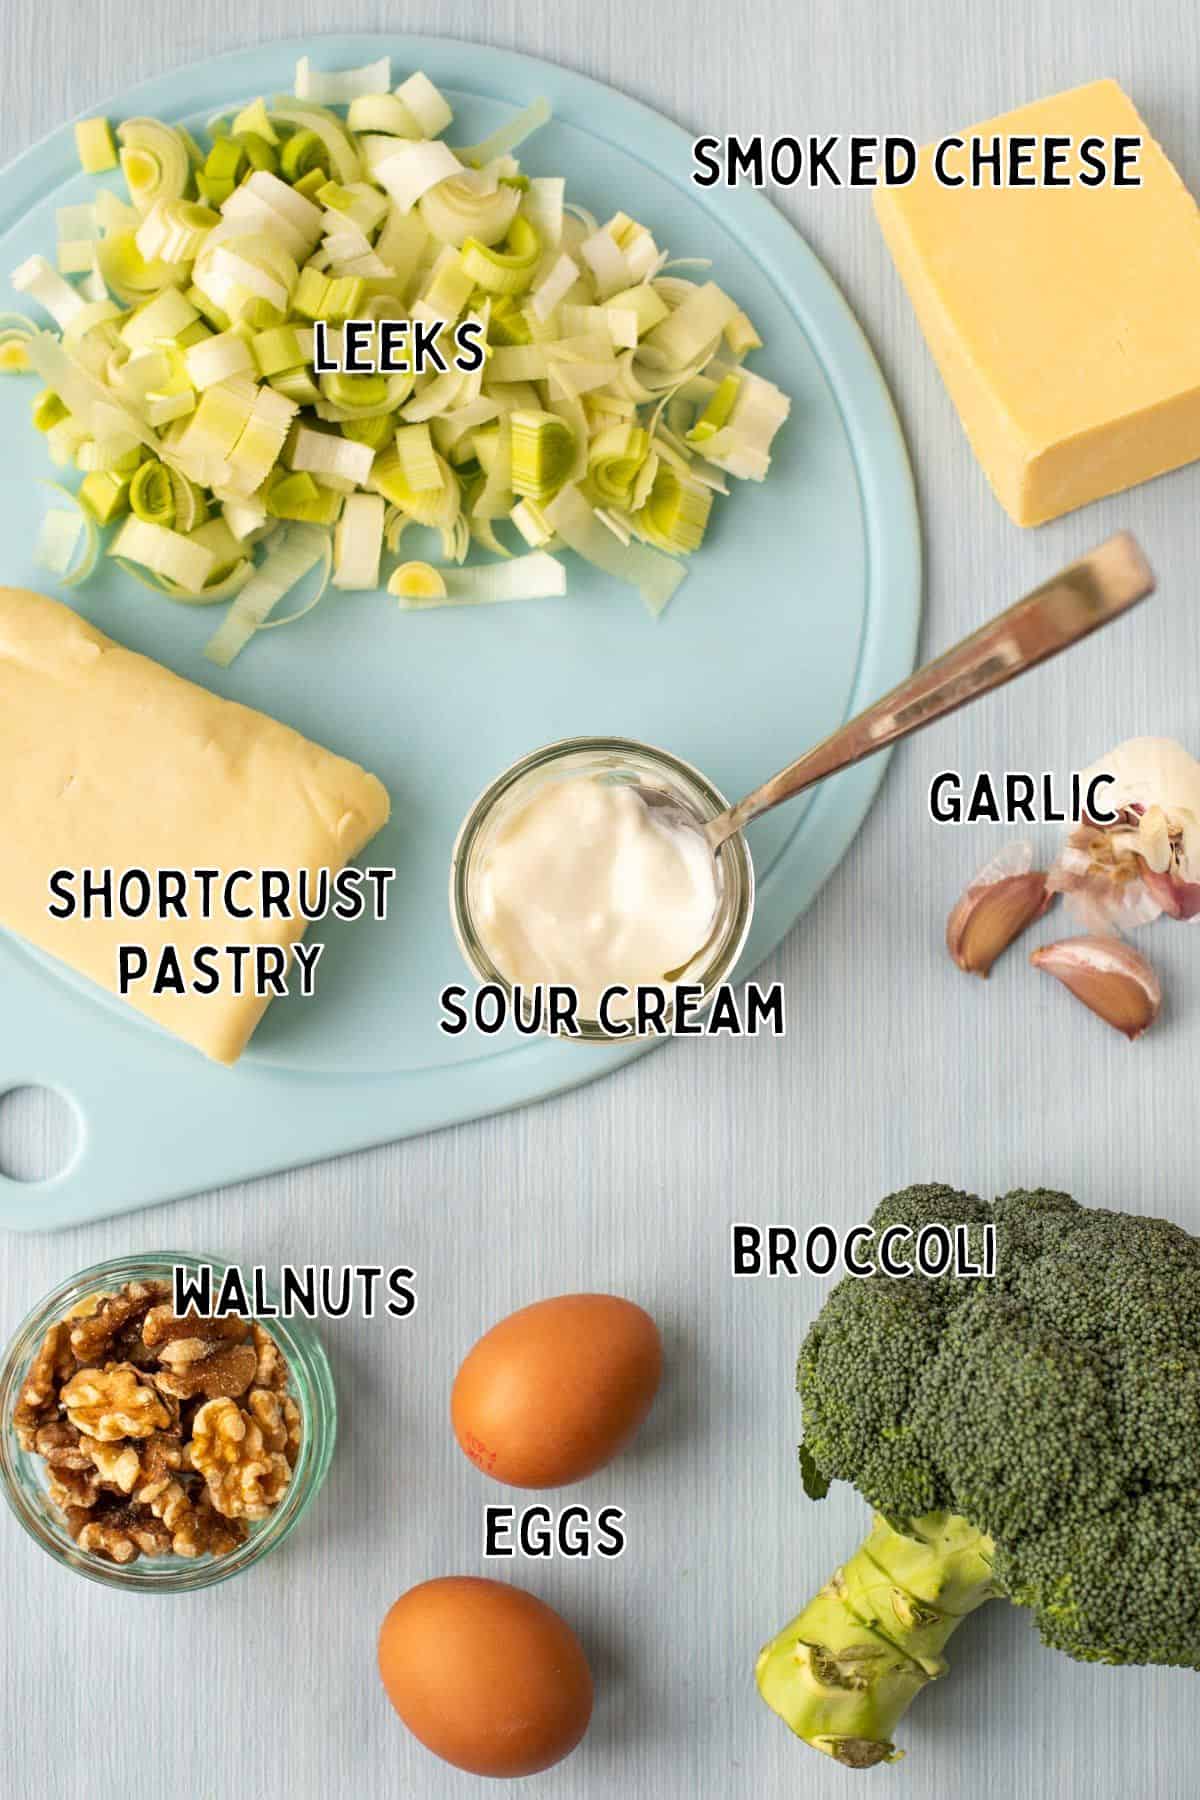 Ingredients for cheese and broccoli tart, with text overlay.